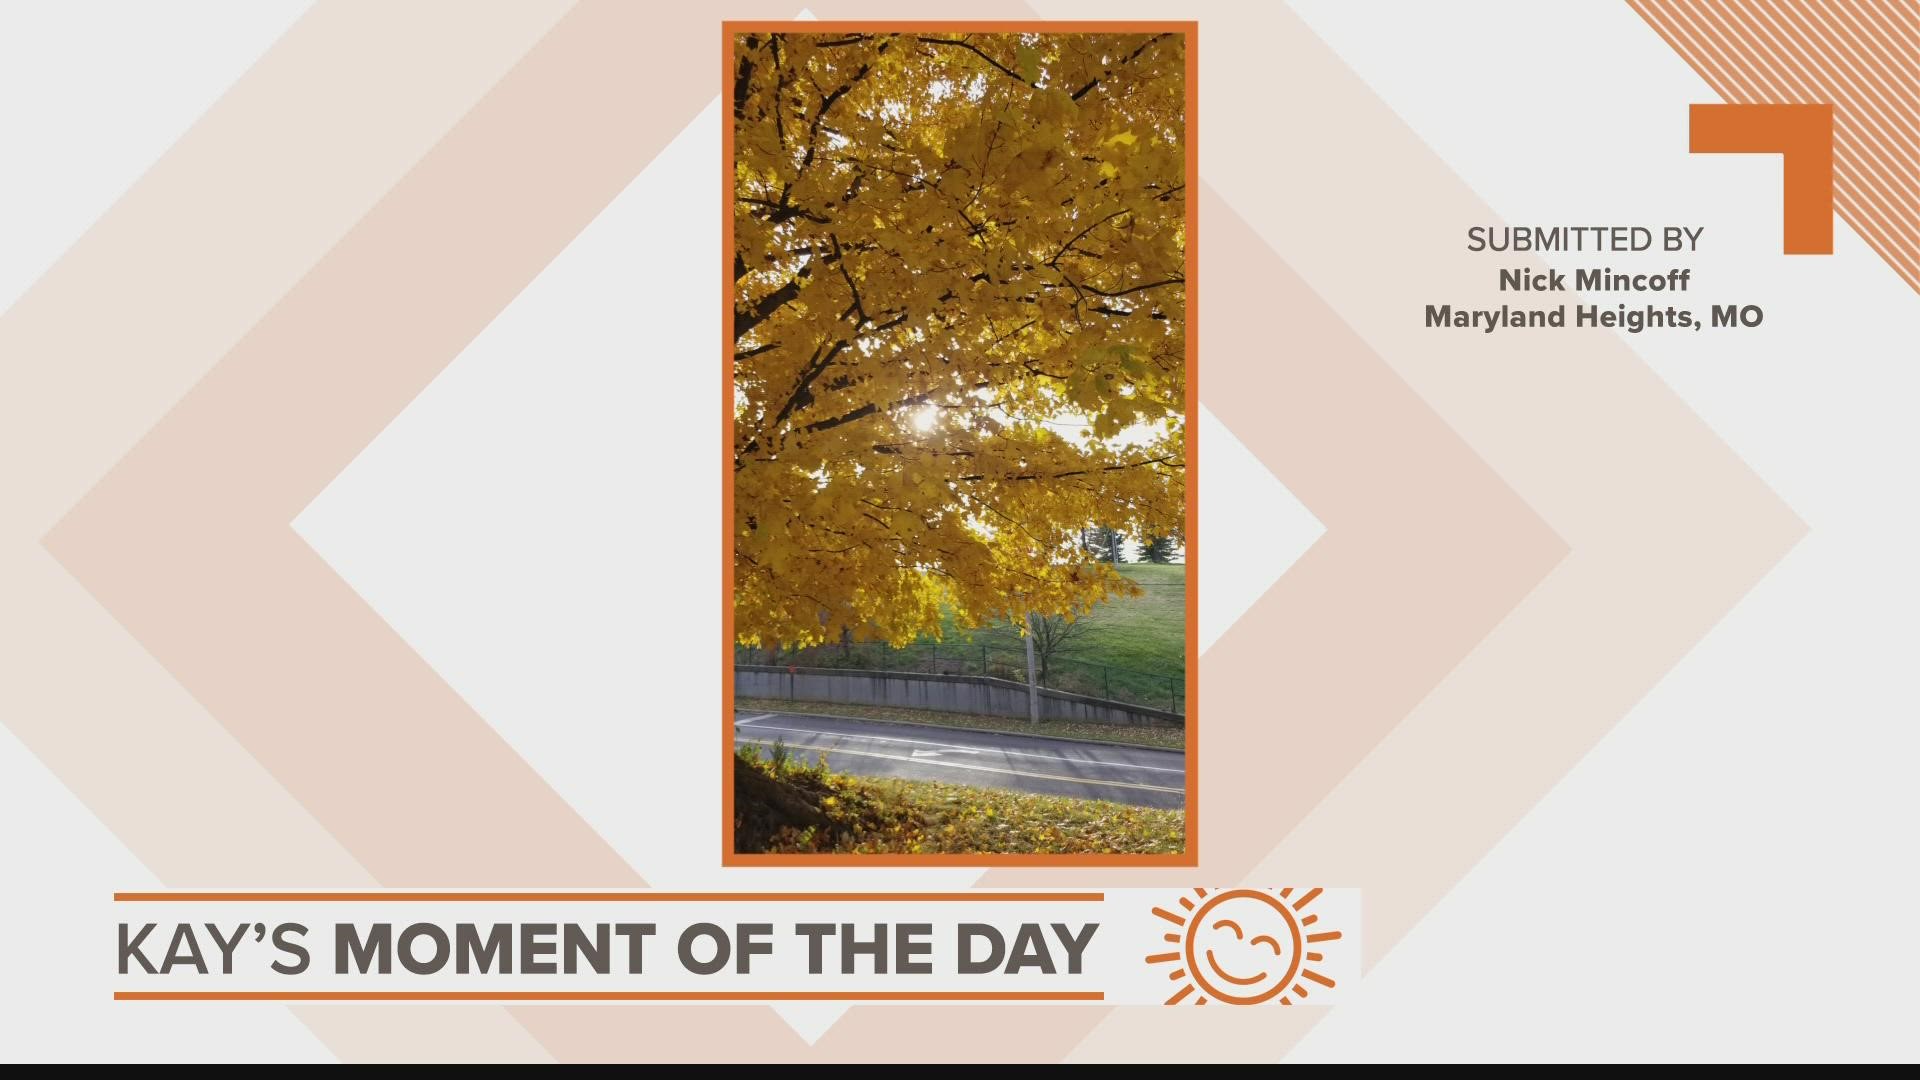 Kay's Moment of the Day for Nov. 17